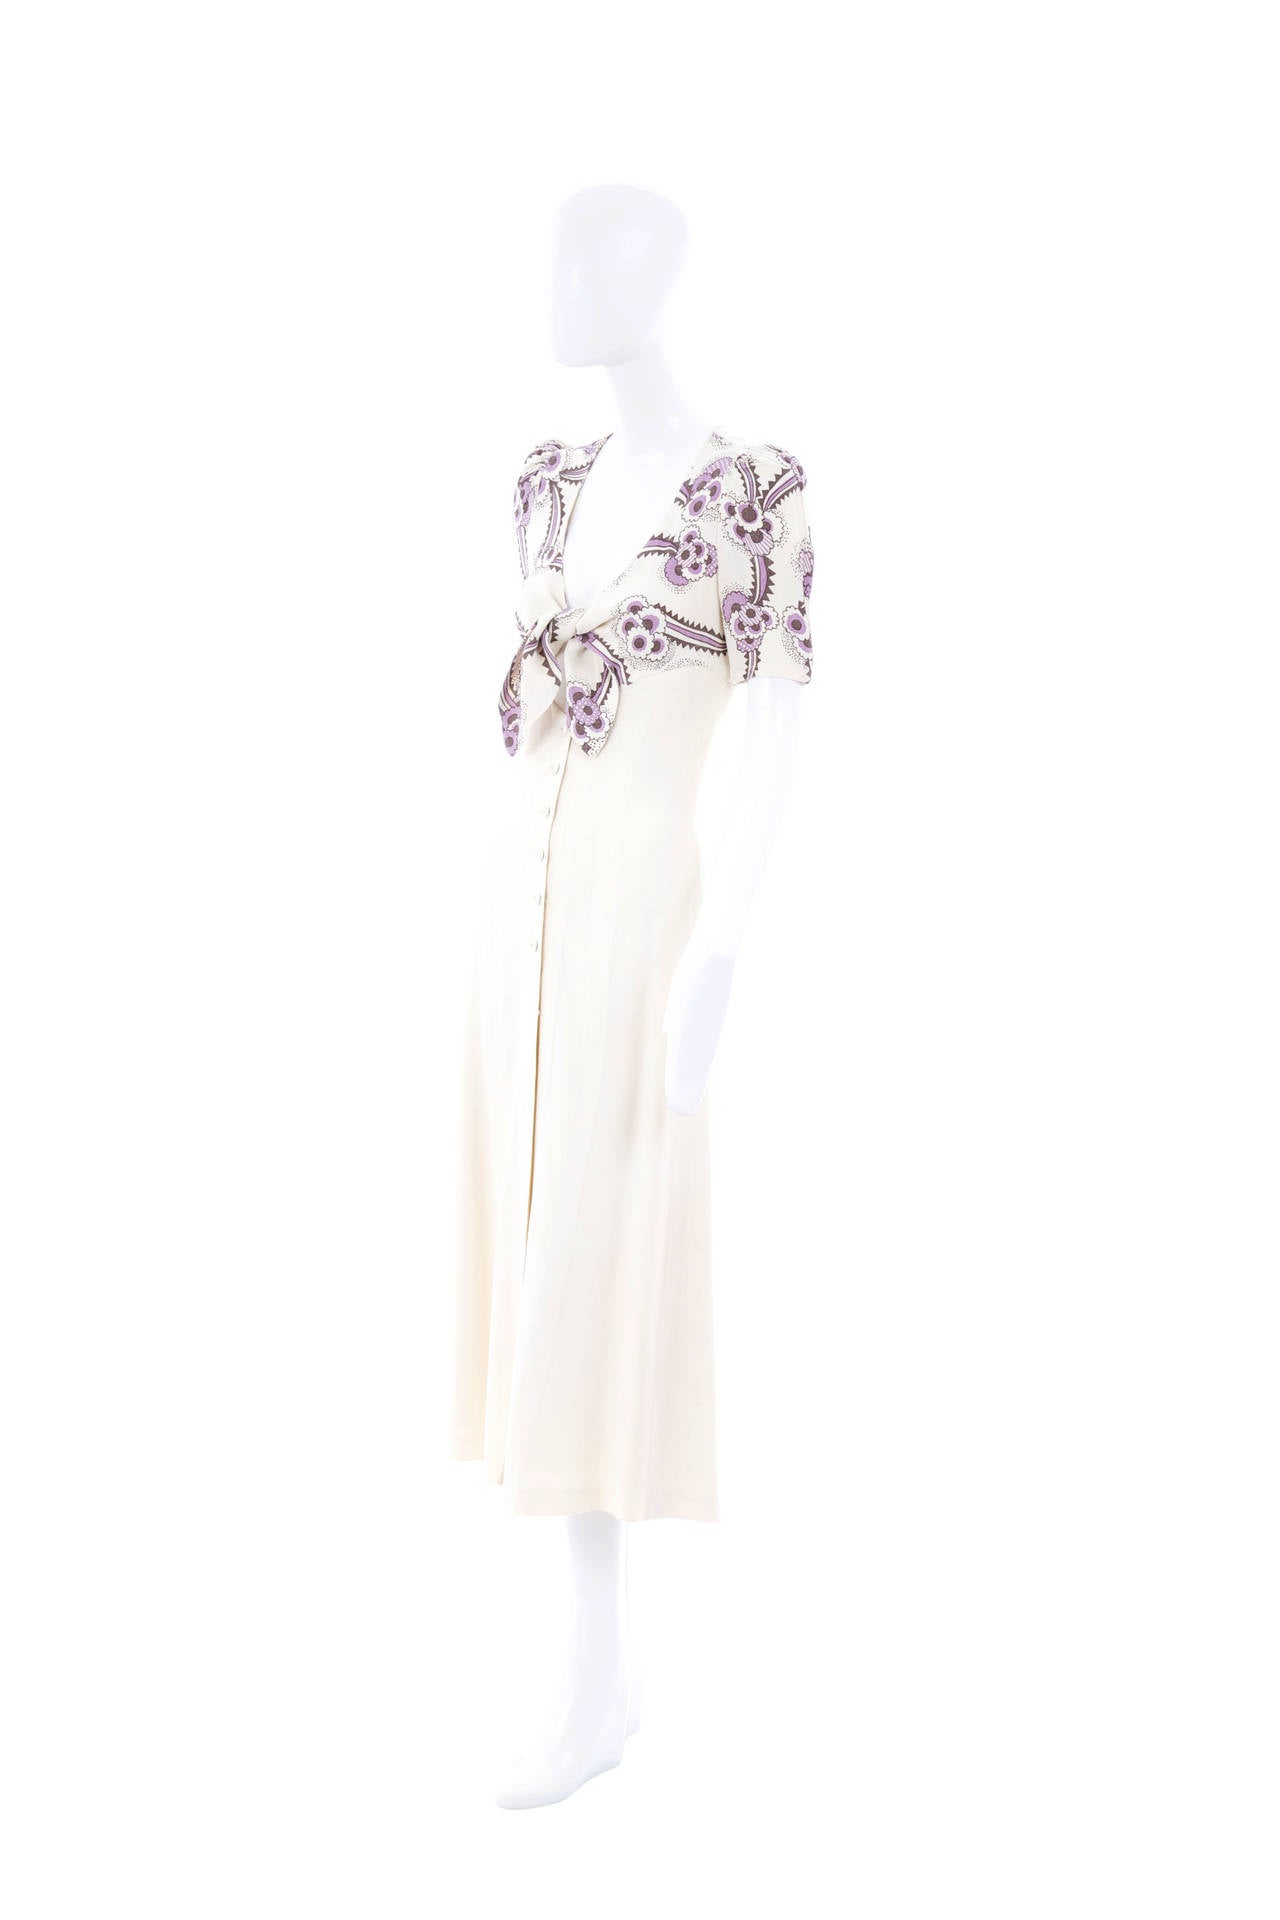 An iconic and covetable dress by Ossie Clark featuring Celia Birtwell’s instantly recognizable Mystic Daisy print, the dress details a keyhole bust with printed tie front and an ivory block colour skirt with matching moss crepe buttons.

Ossie